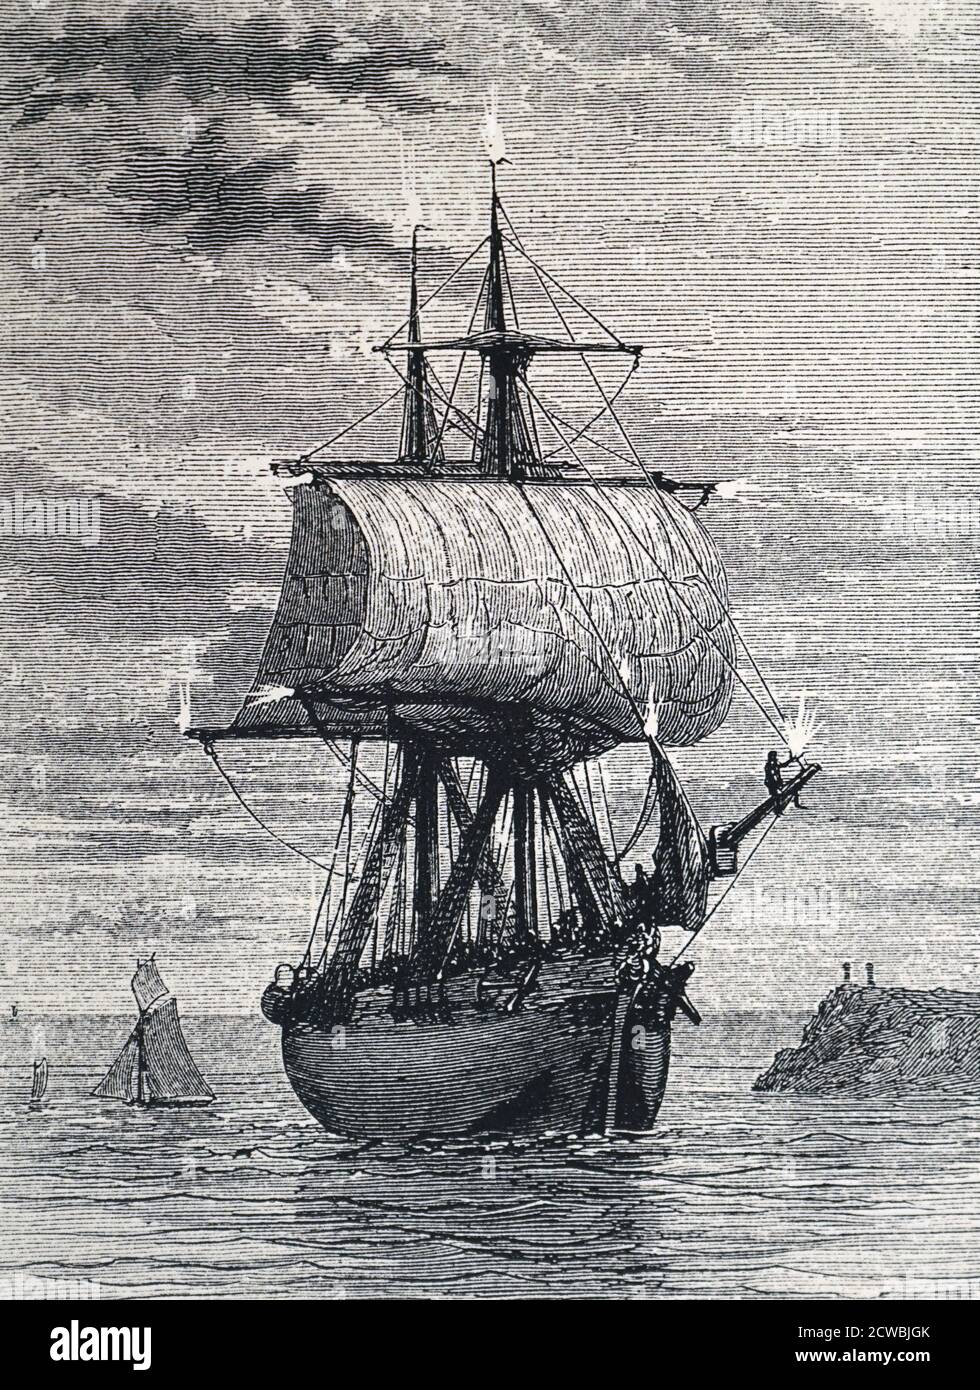 Engraving depicting St Elmo's fire appearing on a sailing ship's mast and spars. Stock Photo